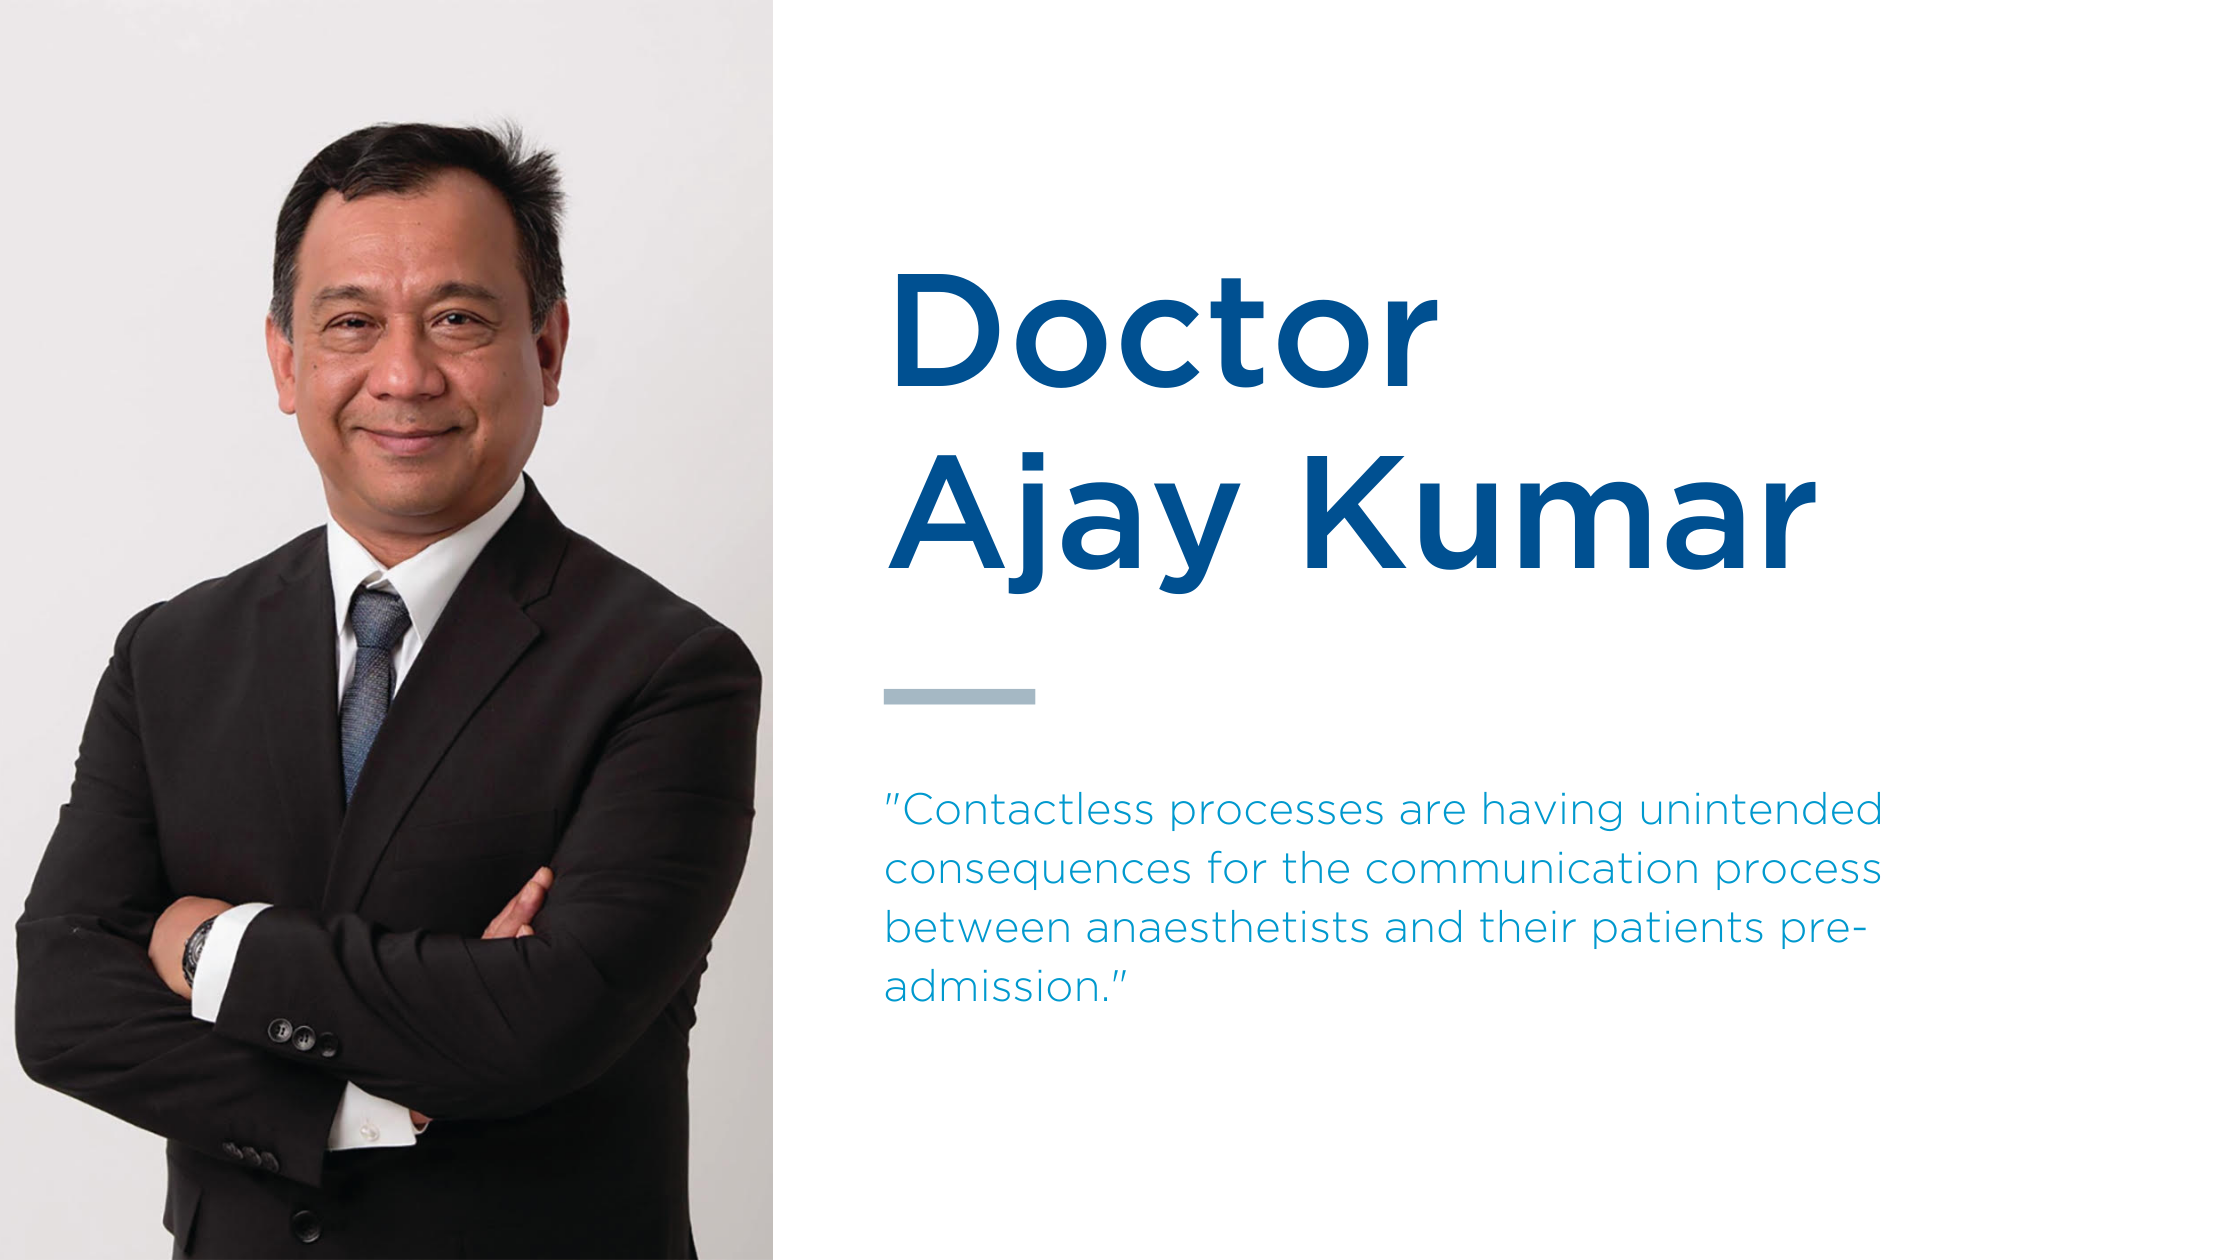 Dr Ajay Kumar discusses informed patient consent